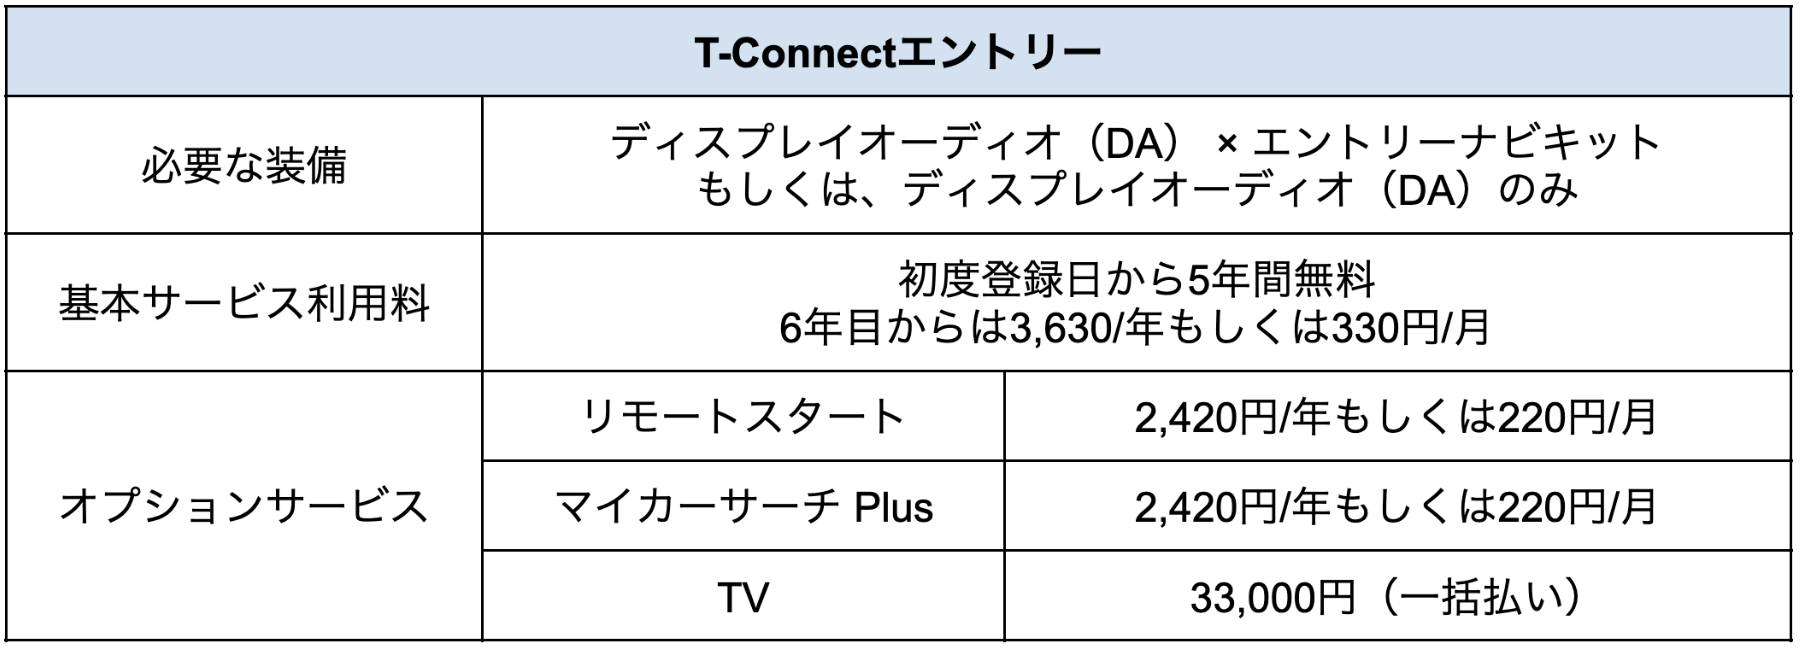 T-Connectエントリー